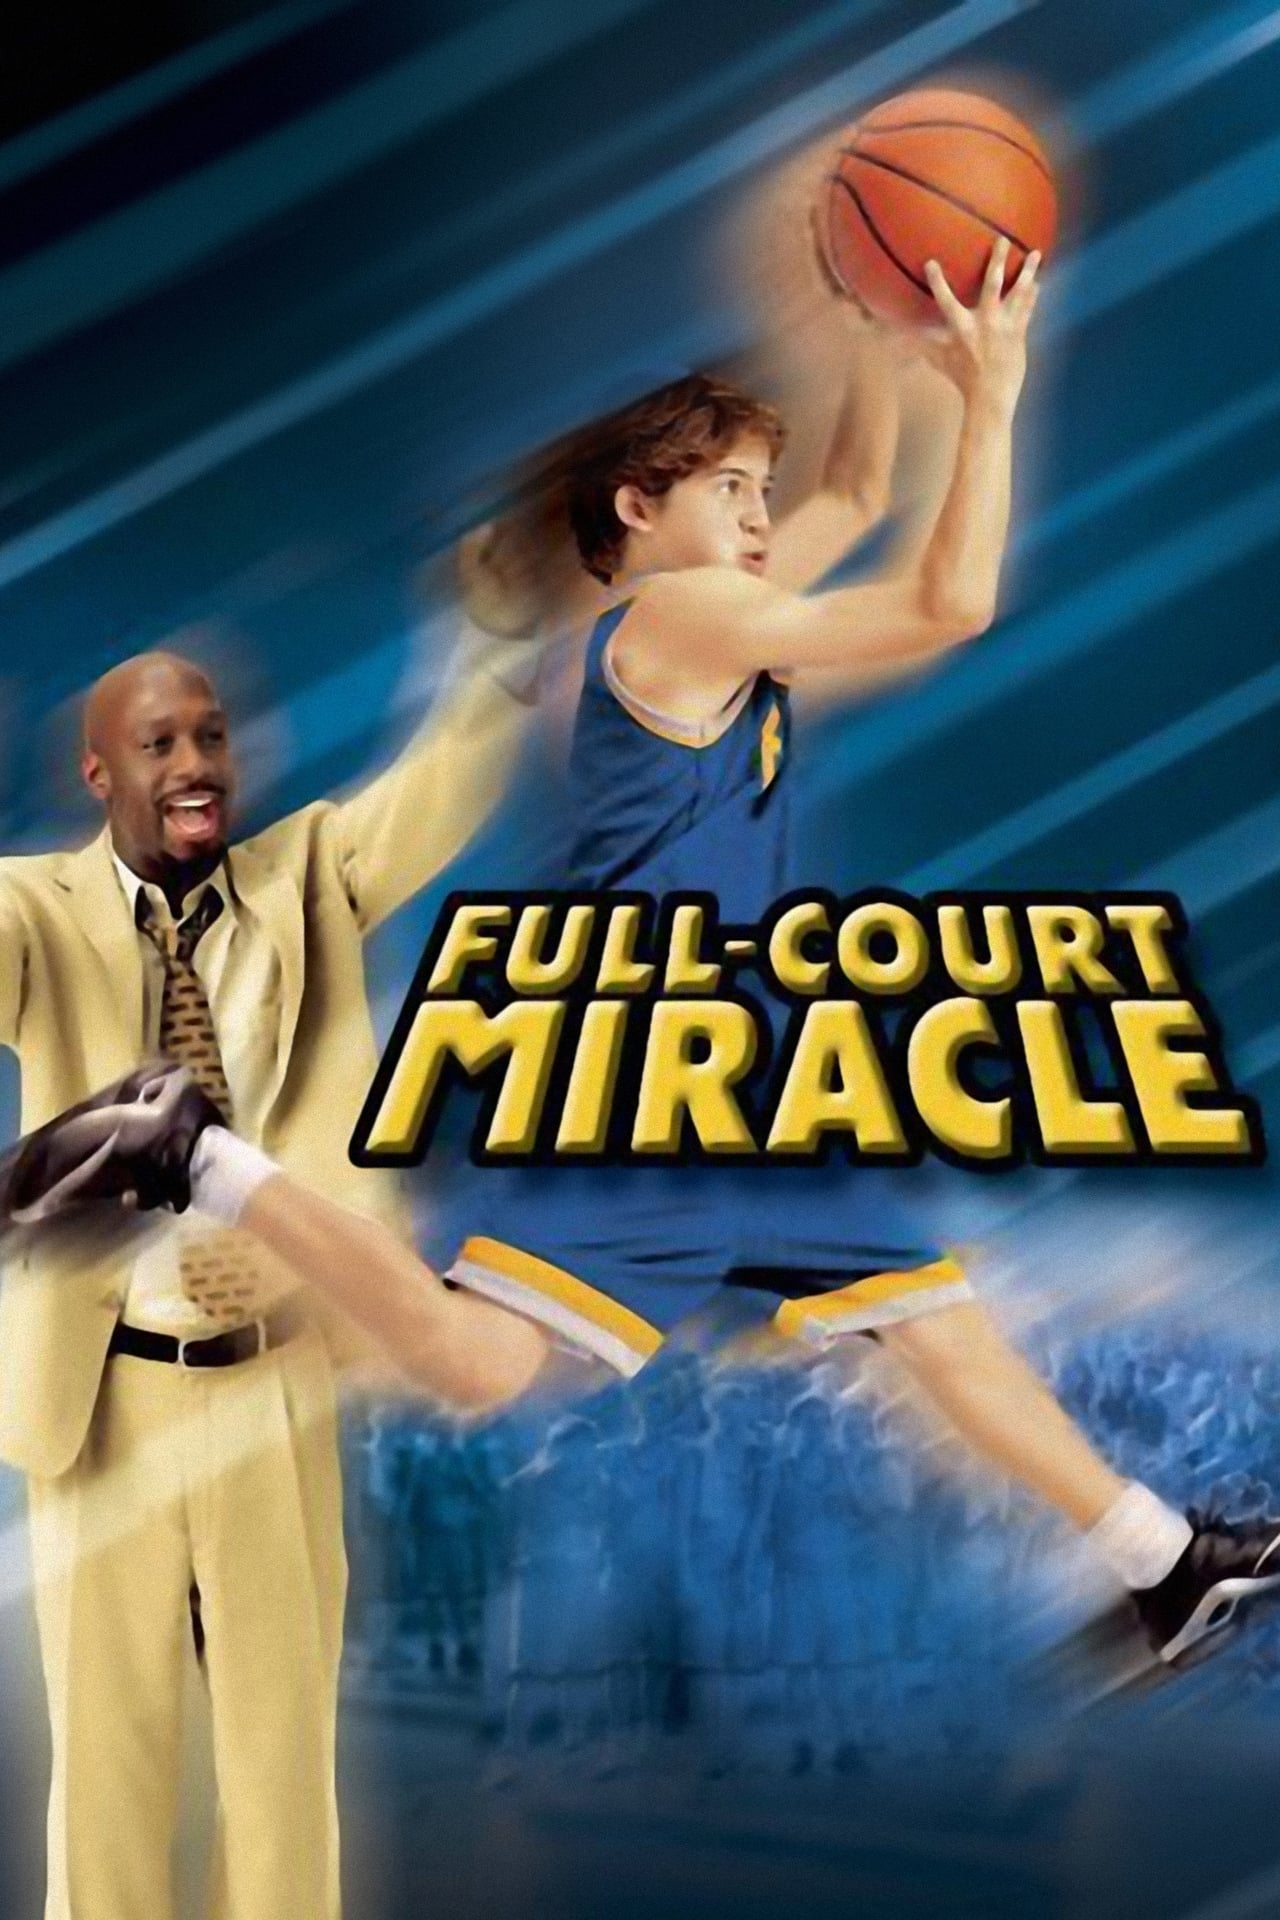 Full-Court Miracle (2003)